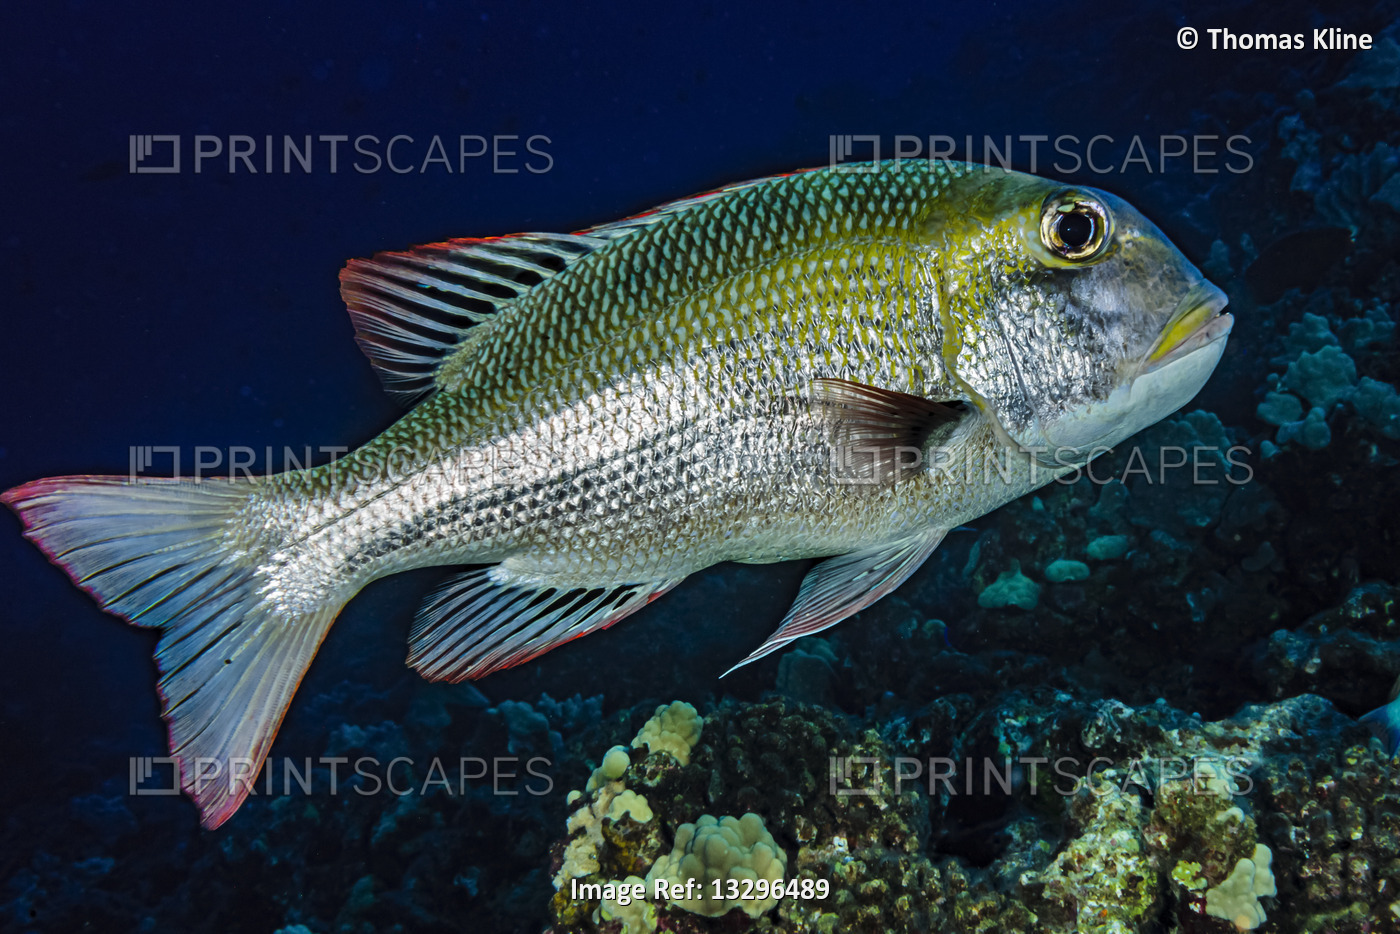 Bigeye Emperor (Monotaxis grandoculis) that was photographed underwater at ...